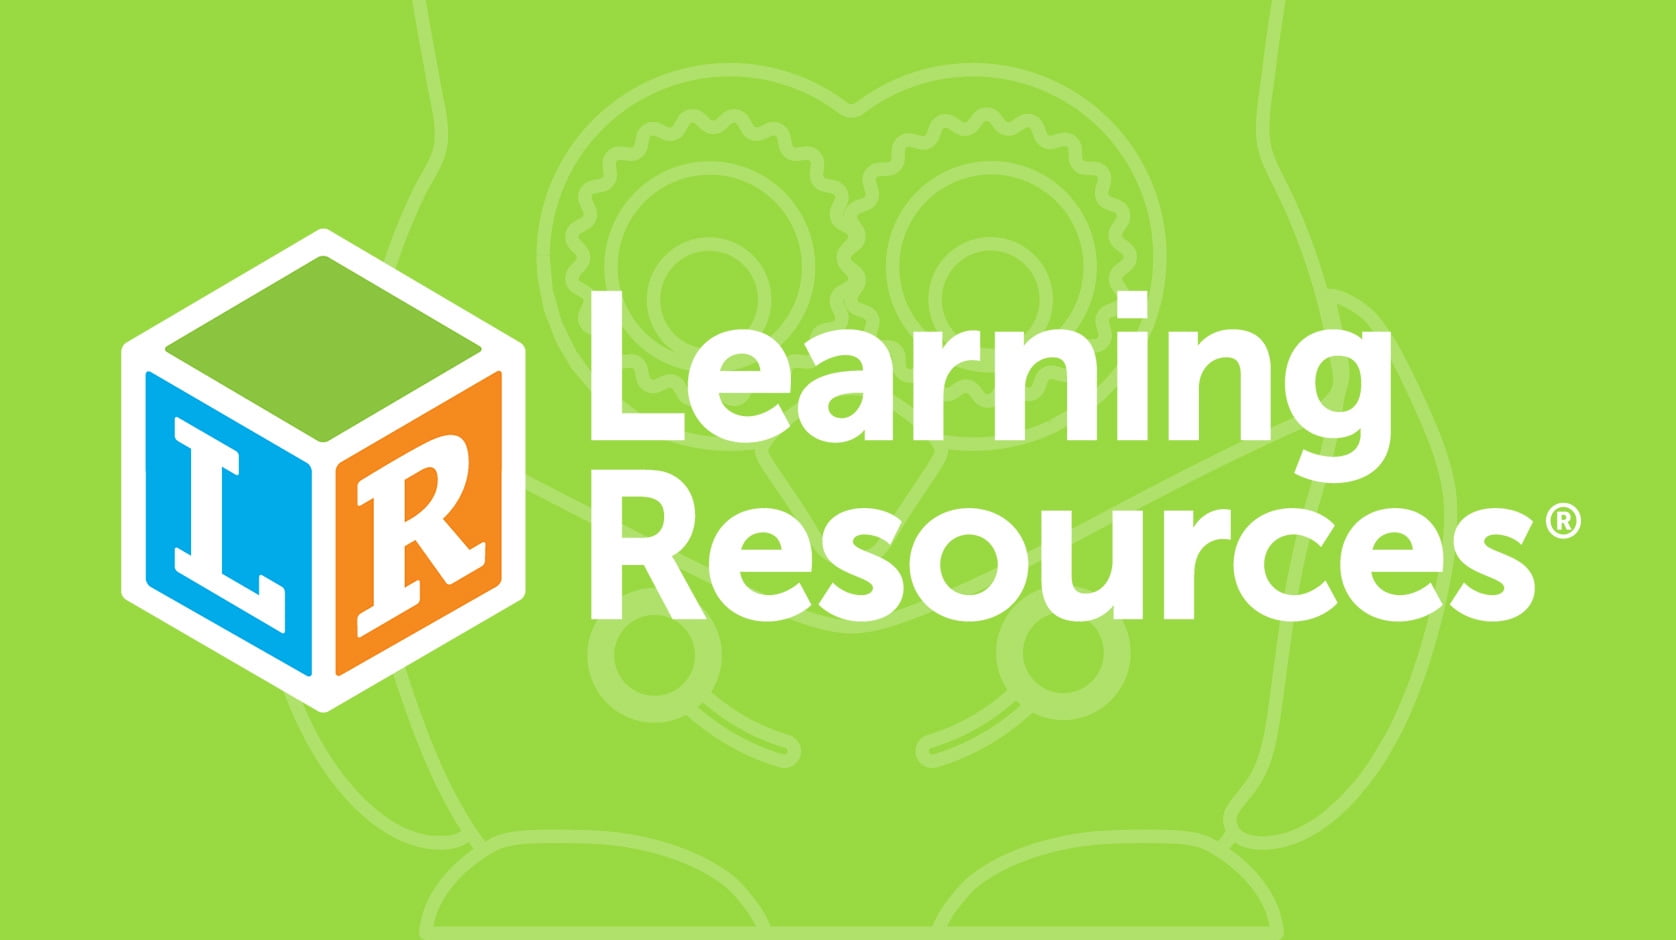 Learning Resources –